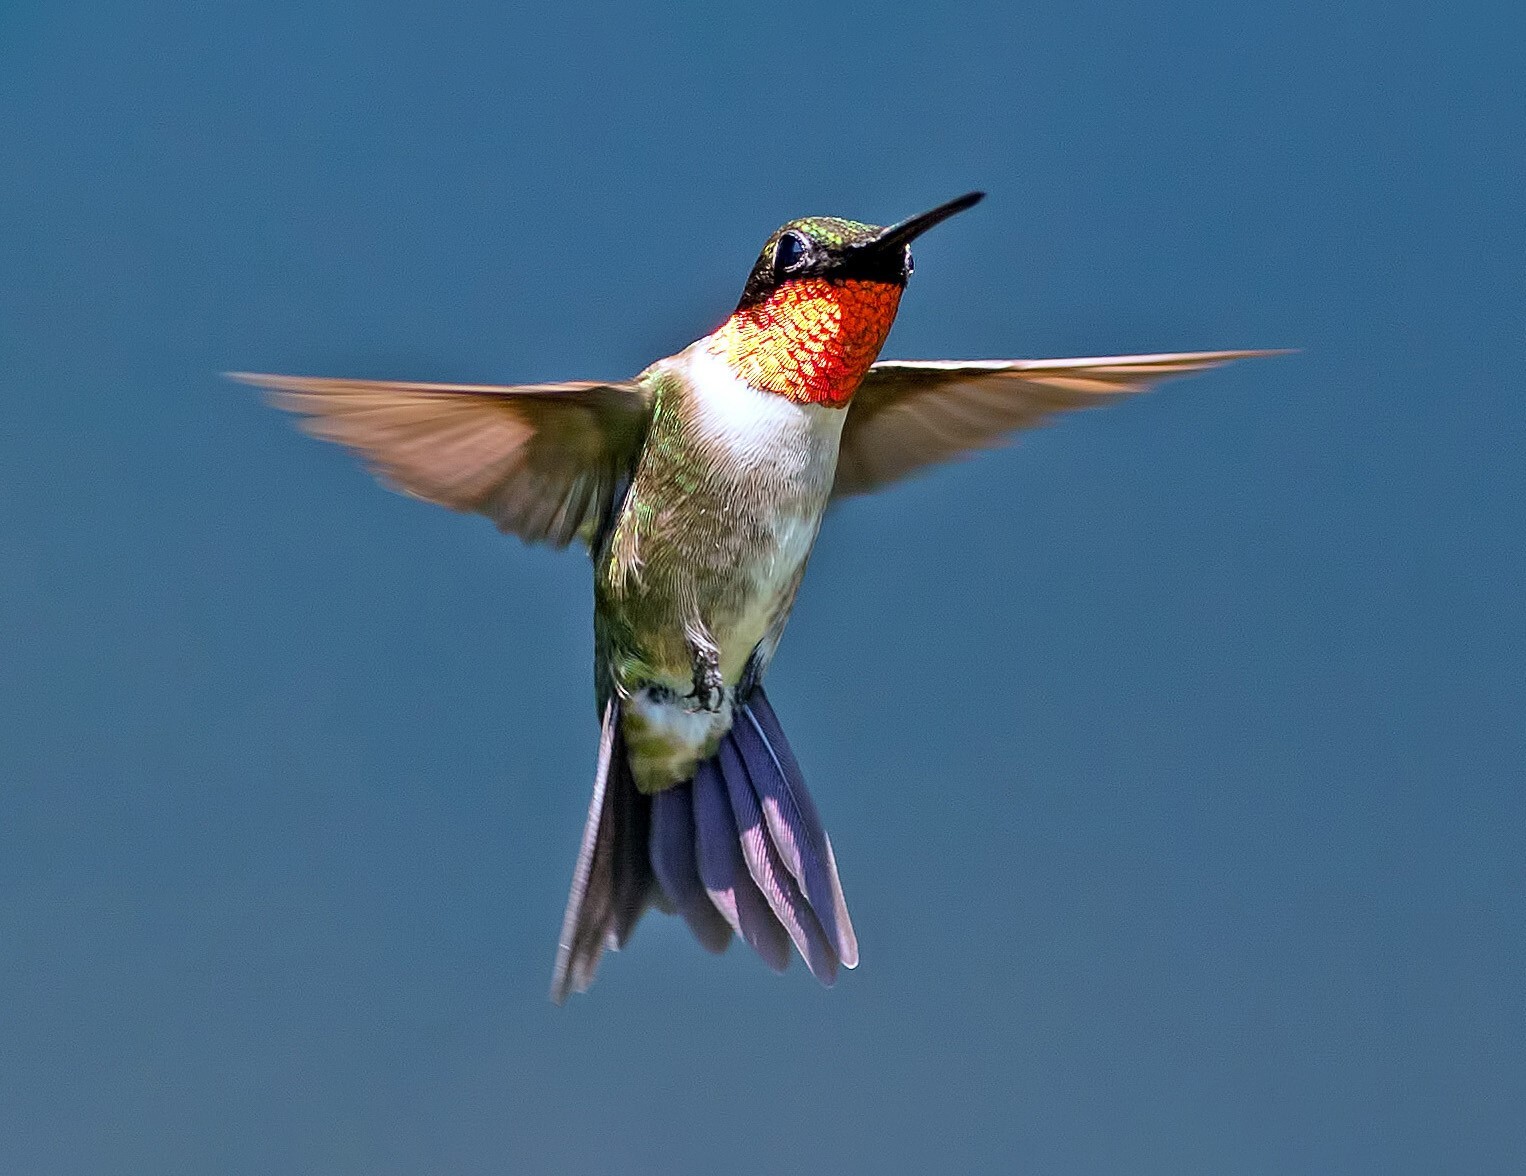 Pelham Bay Park is one of the few sites in New York City where Ruby-throated Hummingbirds are known to nest. Photo: Brian Kushner/Audubon Photography Awards